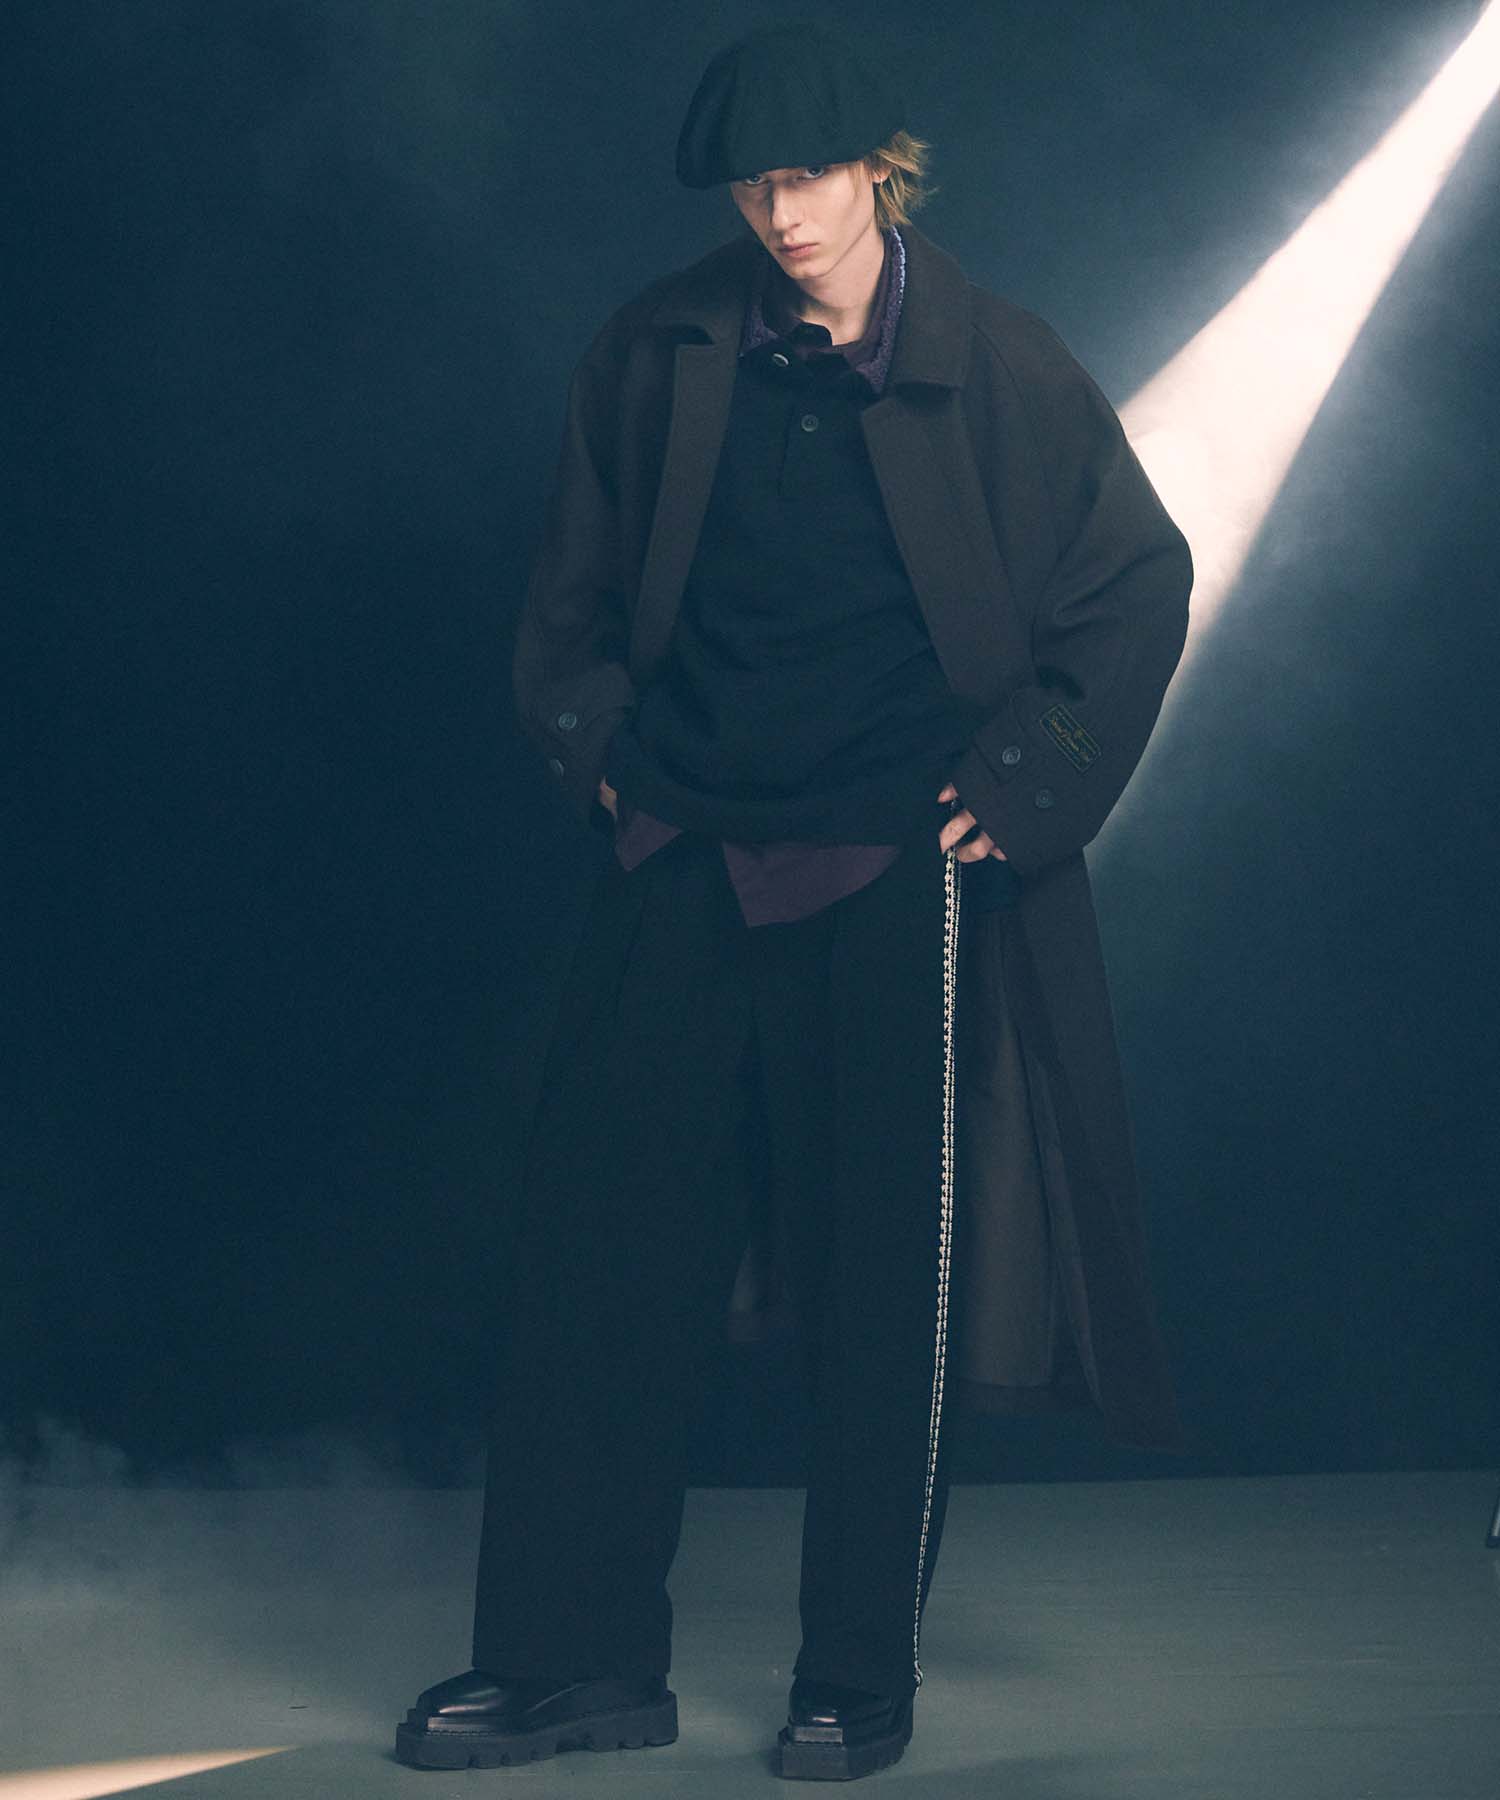 【SALE】【WEB LIMITED】Heavy-Weight Sweat Side Line Prime-Wide Easy Pants